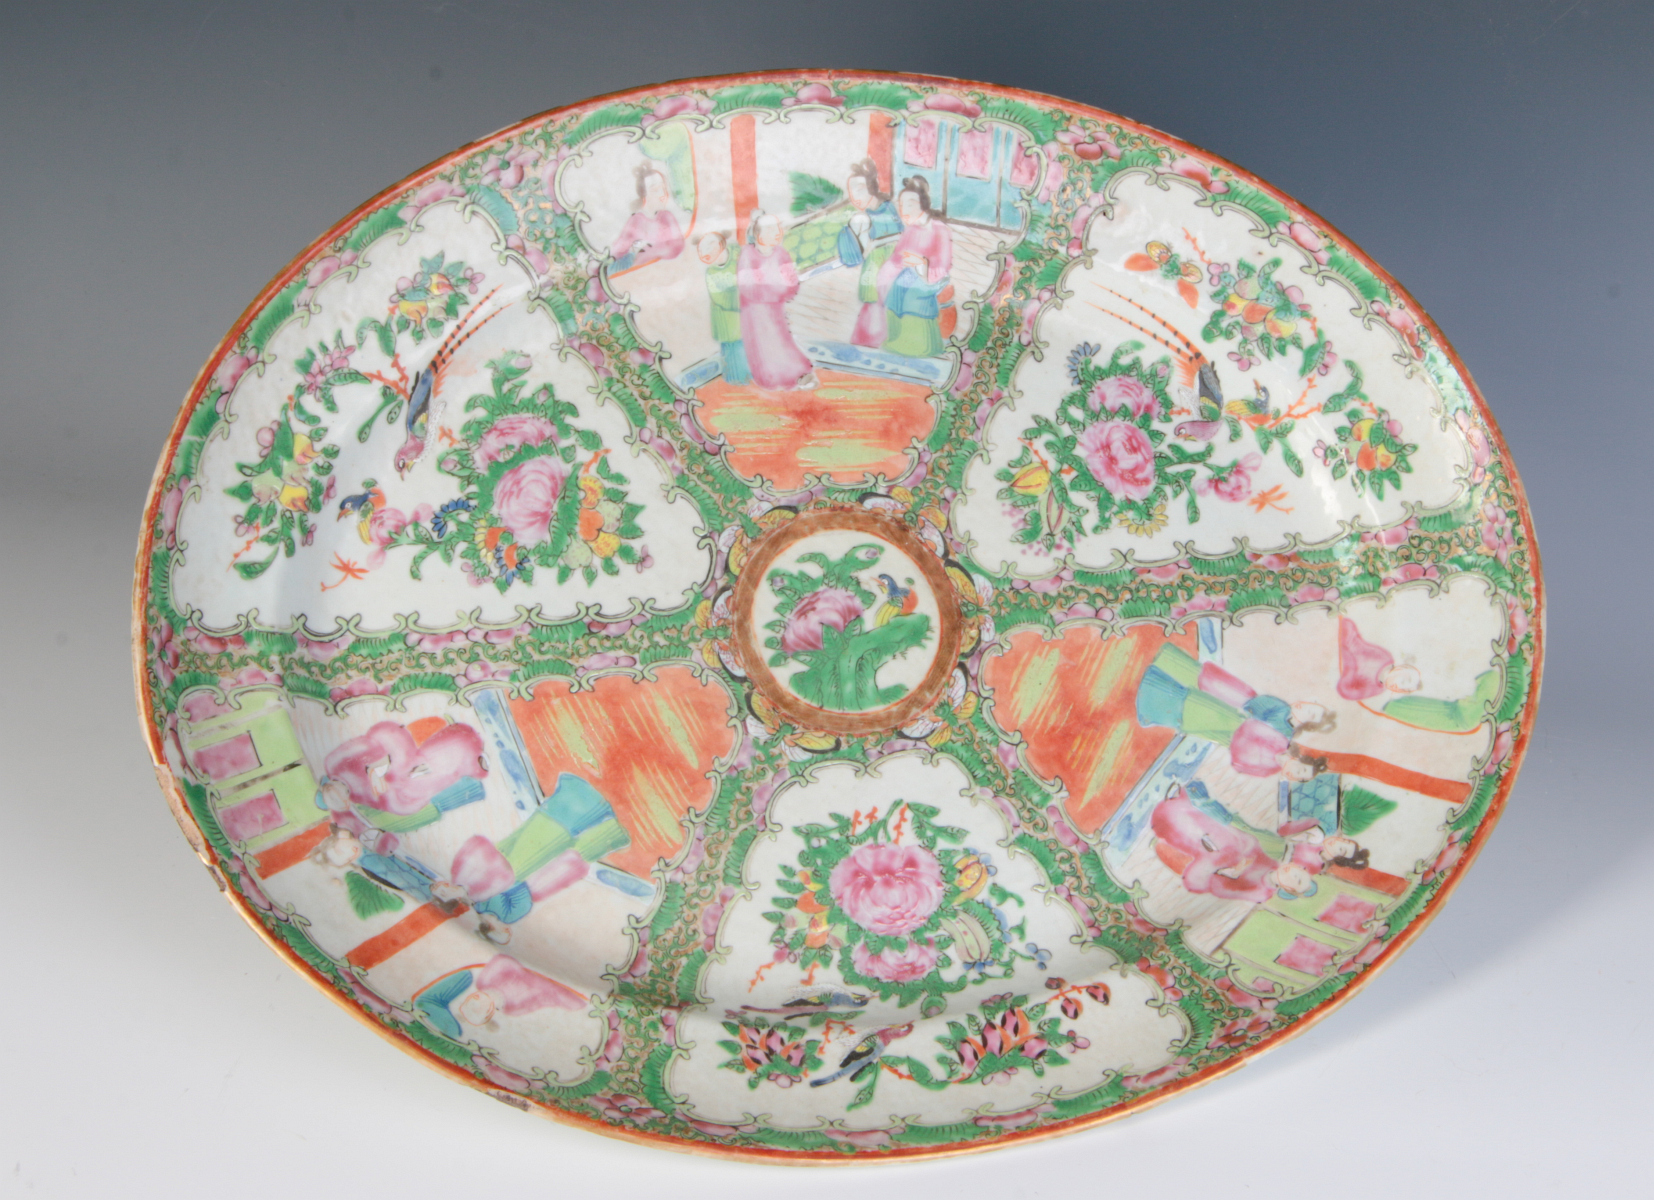 A 19T CENTURY CHINESE EXPORT ROSE MEDALLION PLATTER